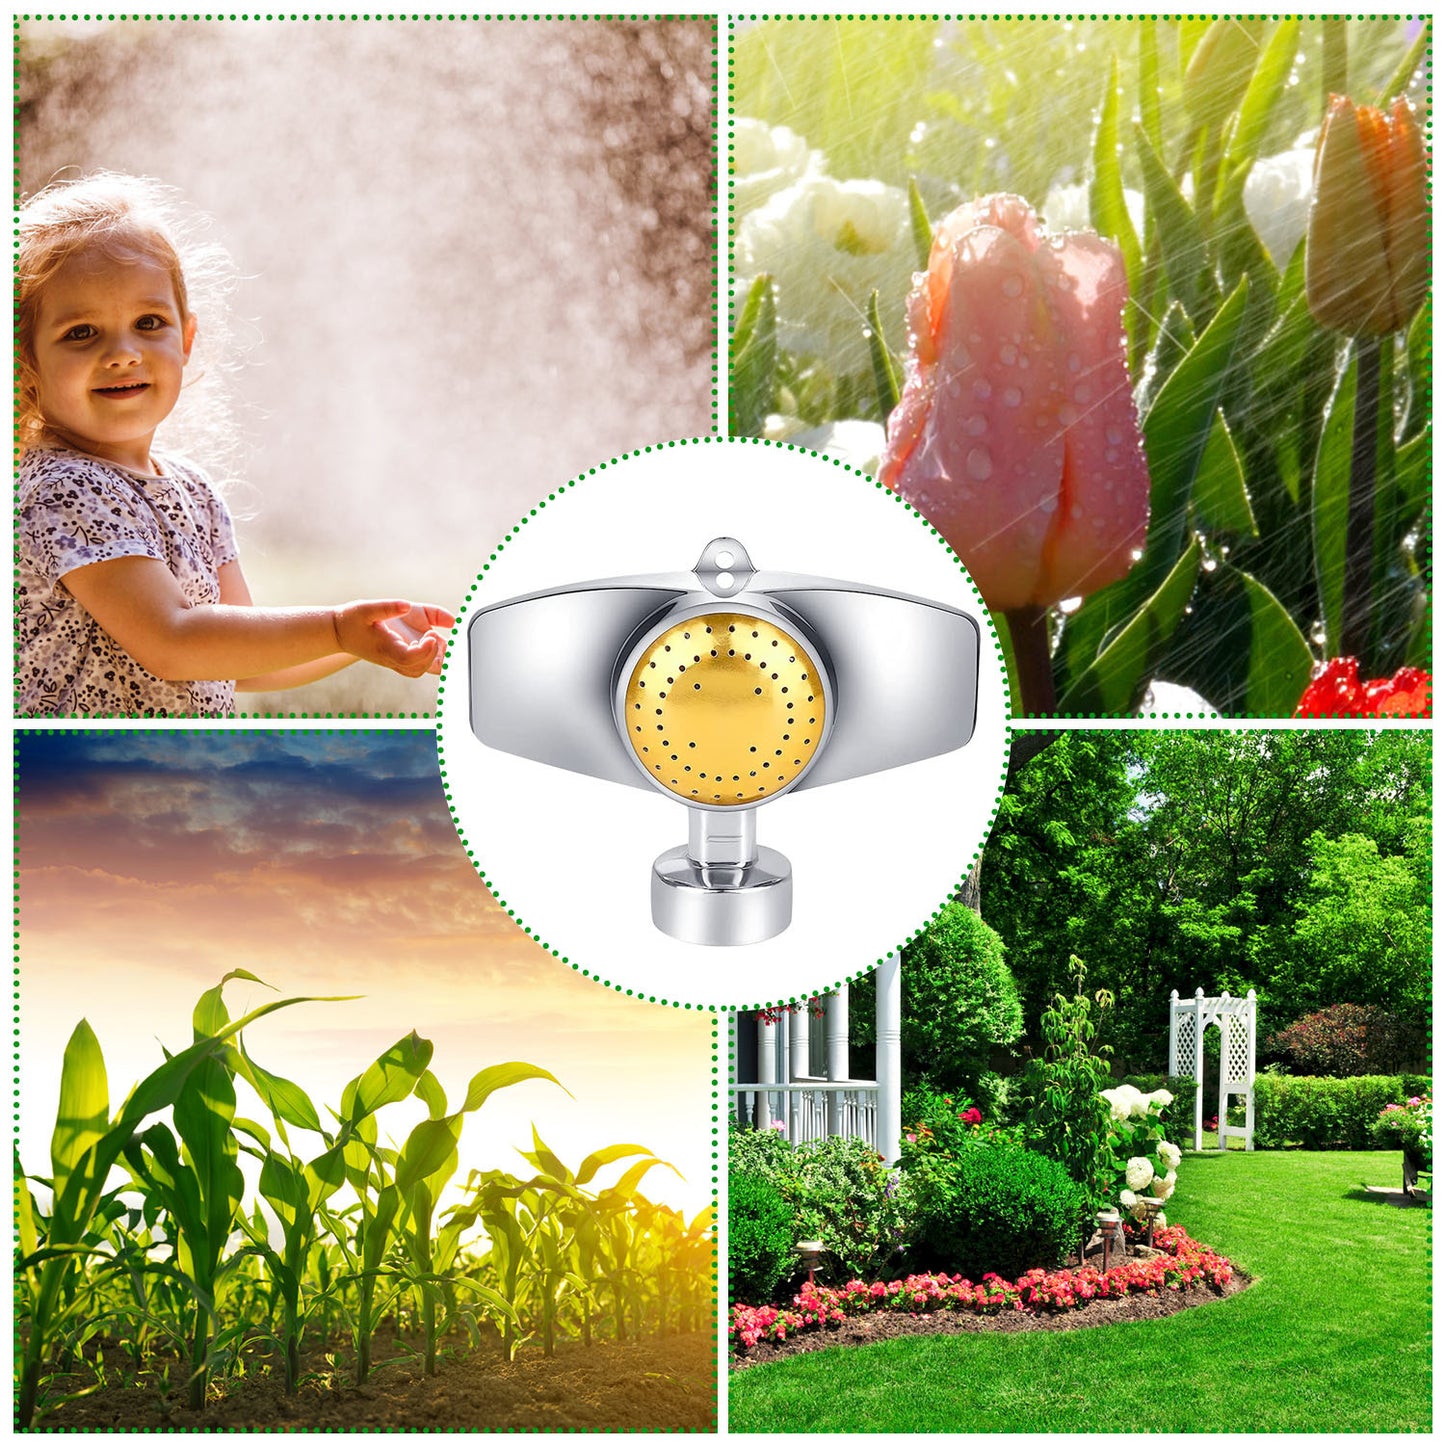 2Pcs Circular Spot Sprinkler 360 Degree Small Circle Sprinkler with Gentle Water Flow Covers up to 30FT Diameter Lawn Garden